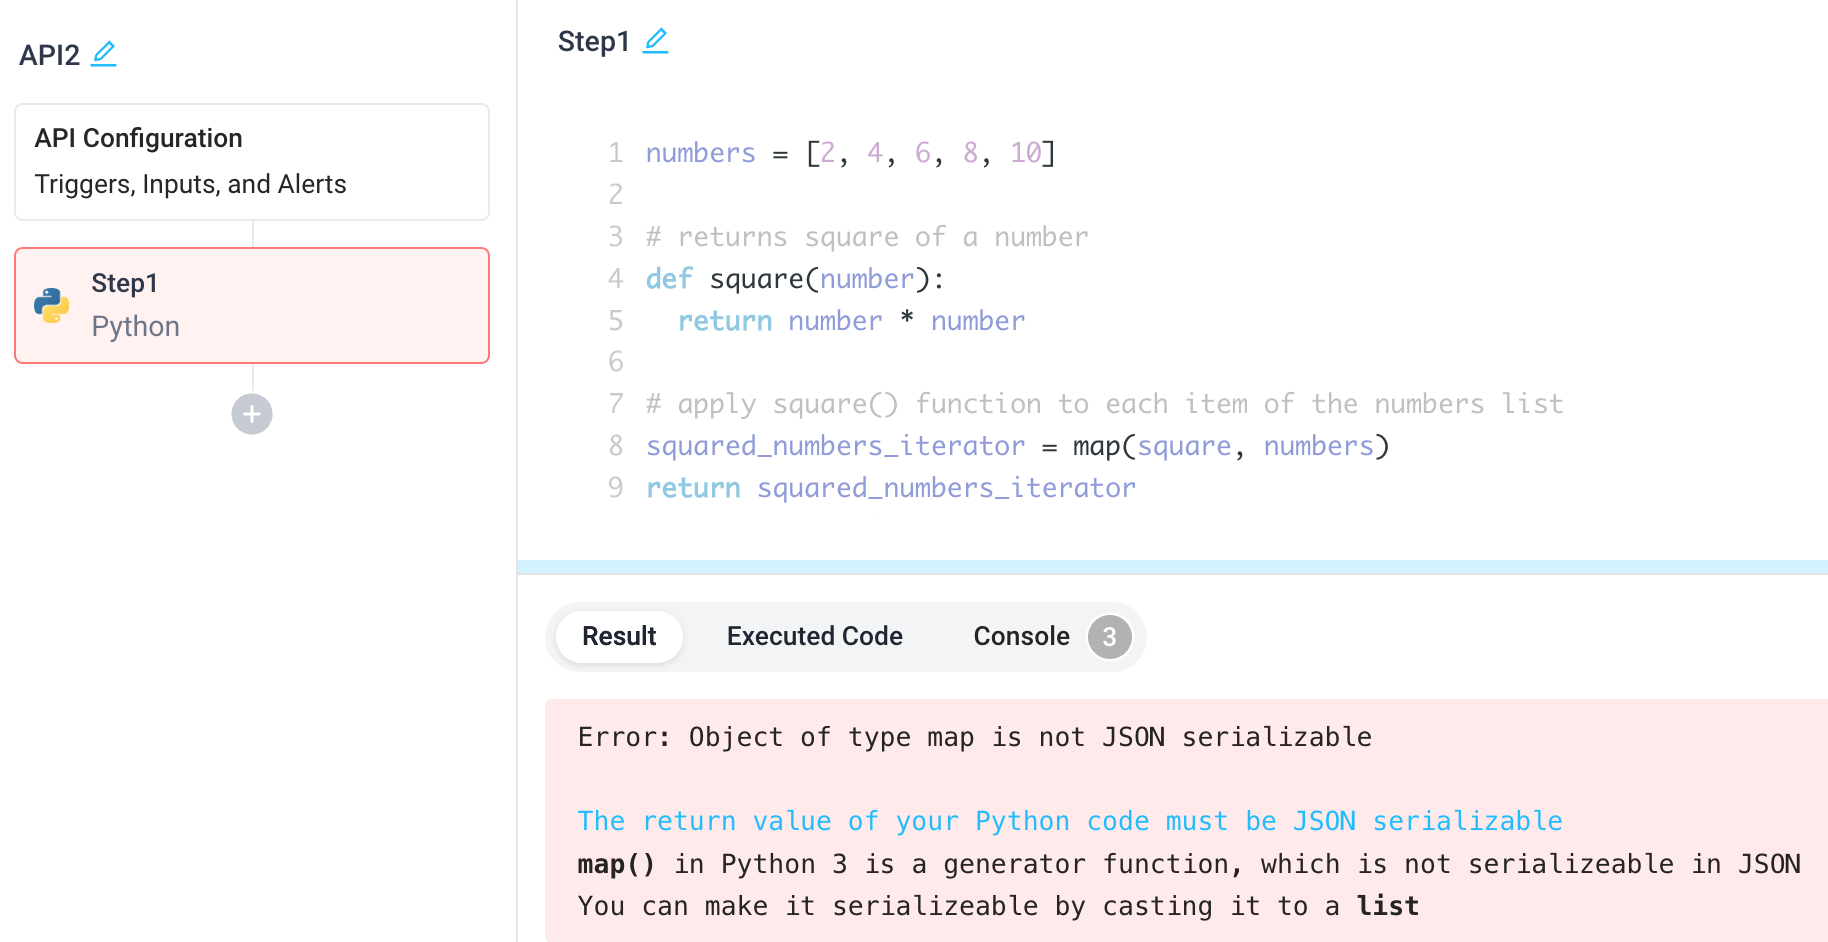 Python errors are shown with context to ease troubleshooting